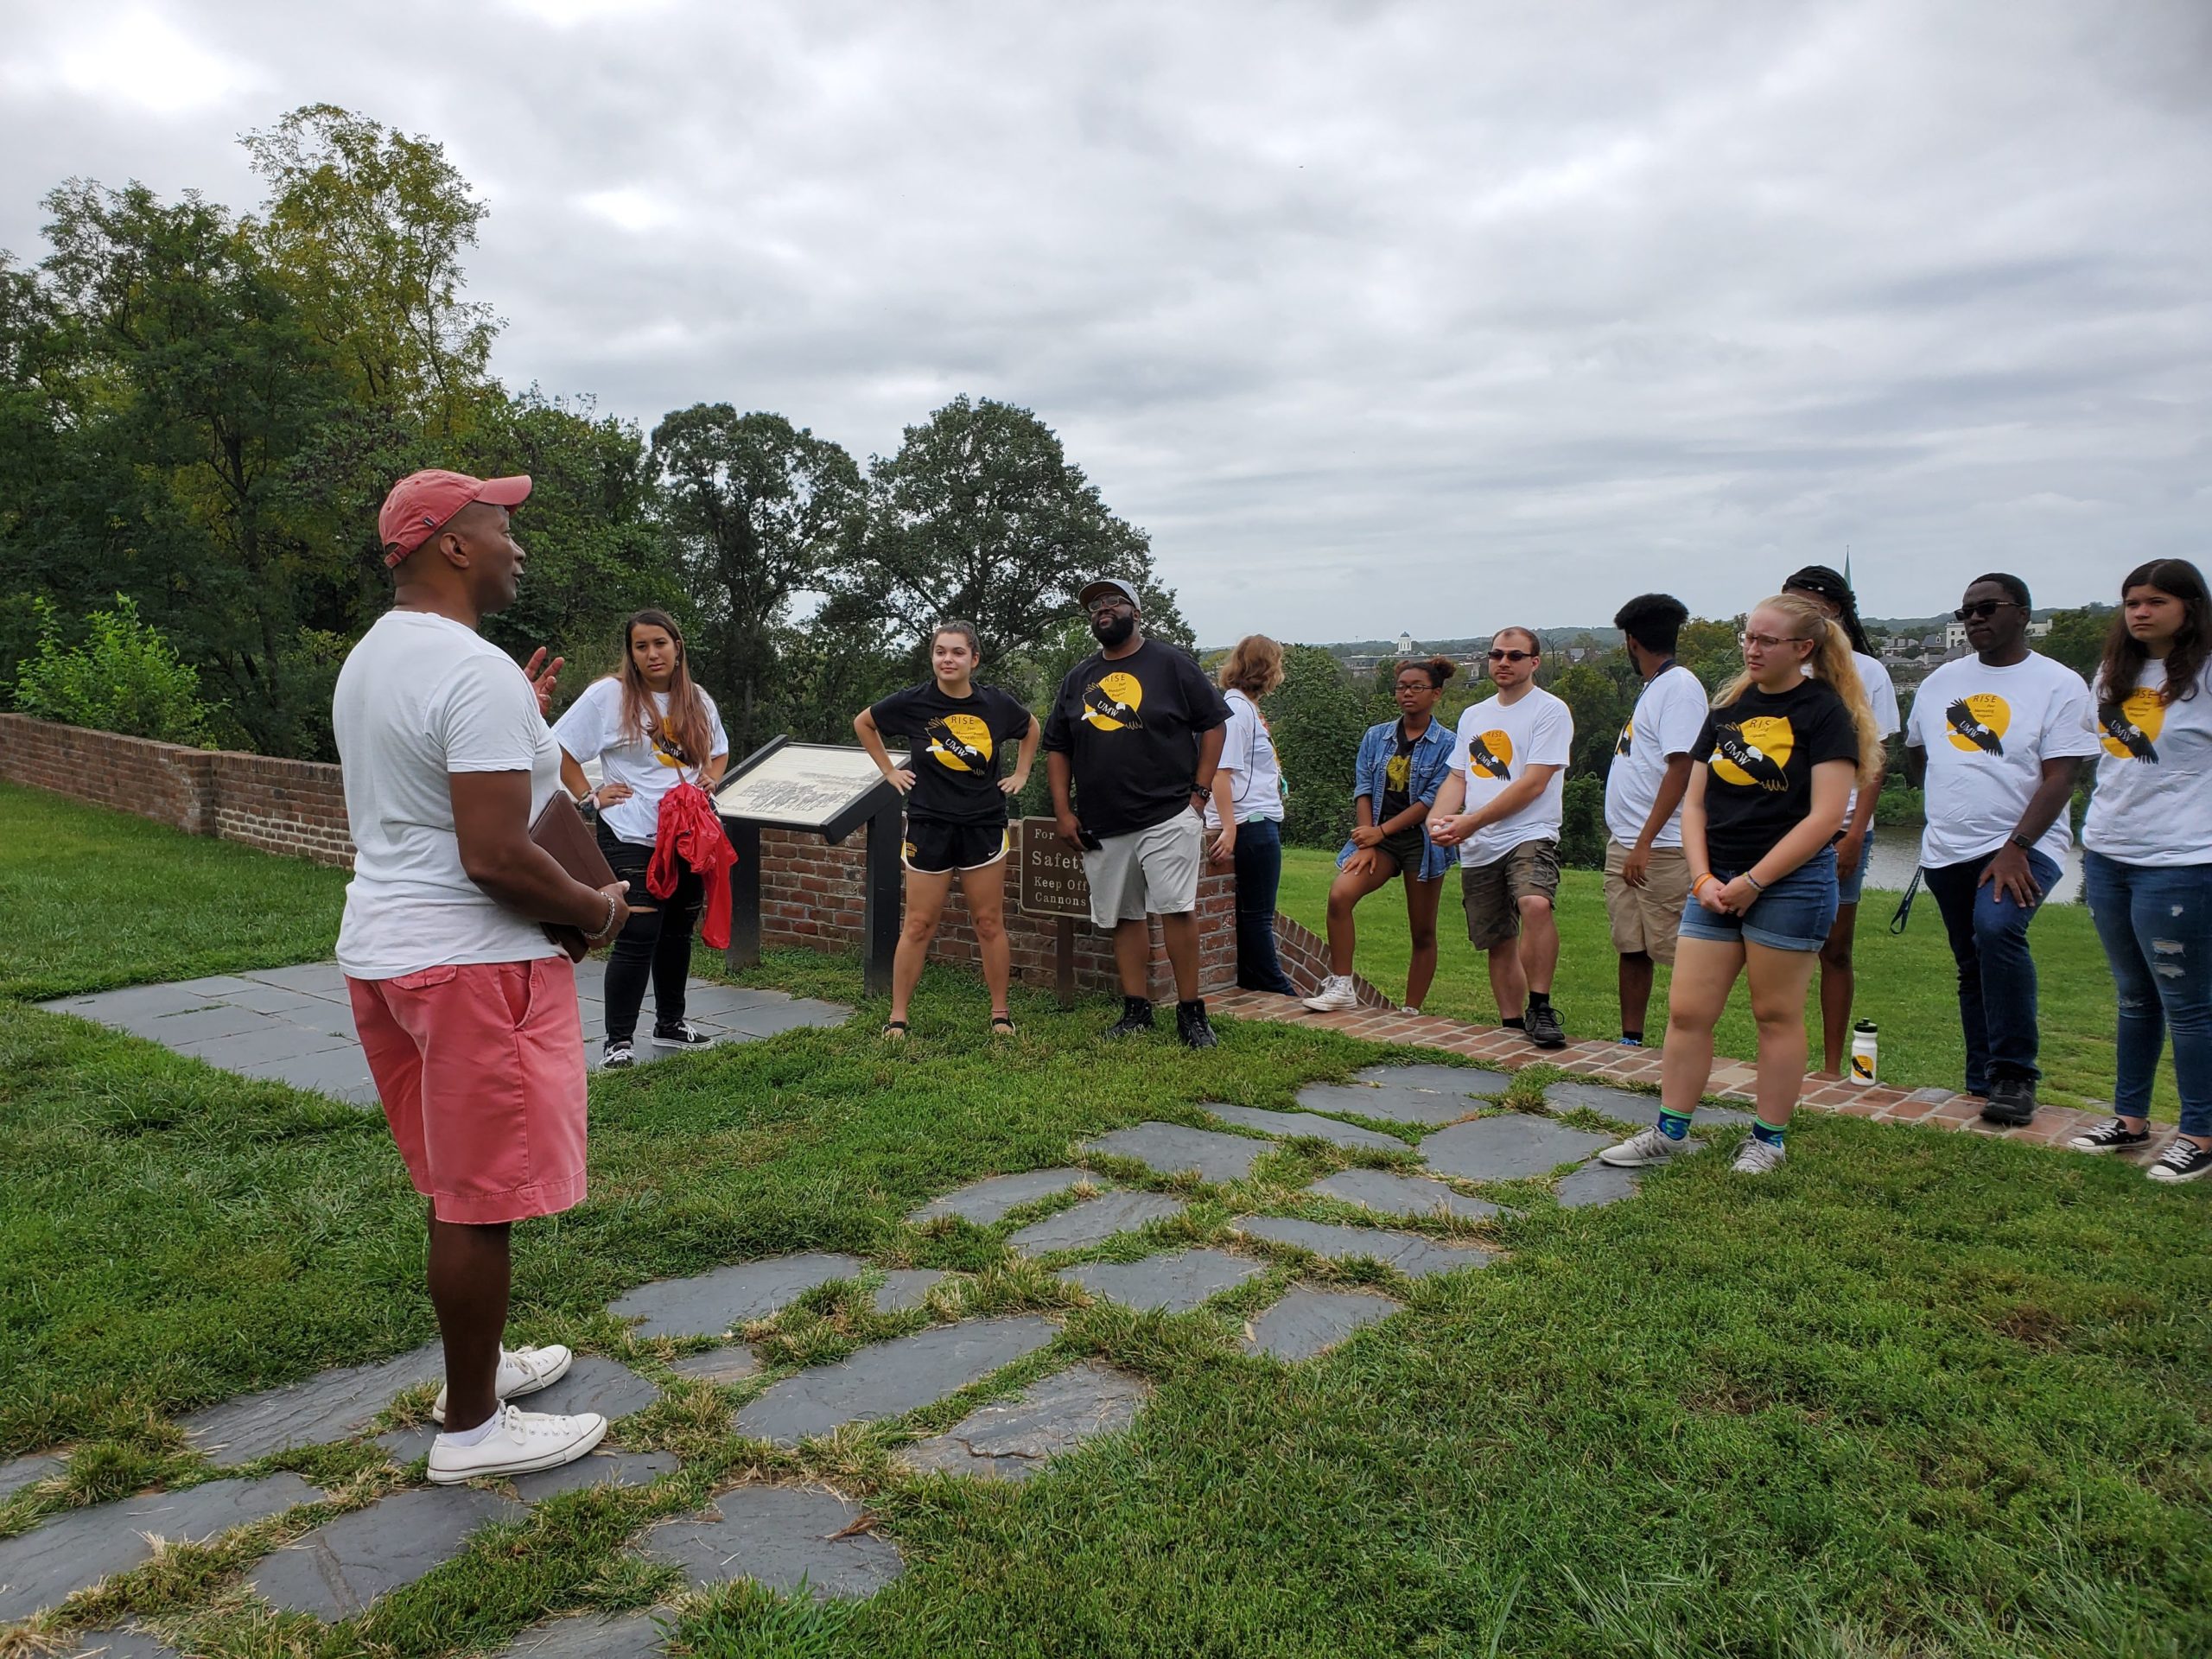 Outside the Chatham Manor, RISE students listen intently to Dean Rucker discuss Fredericksburg history